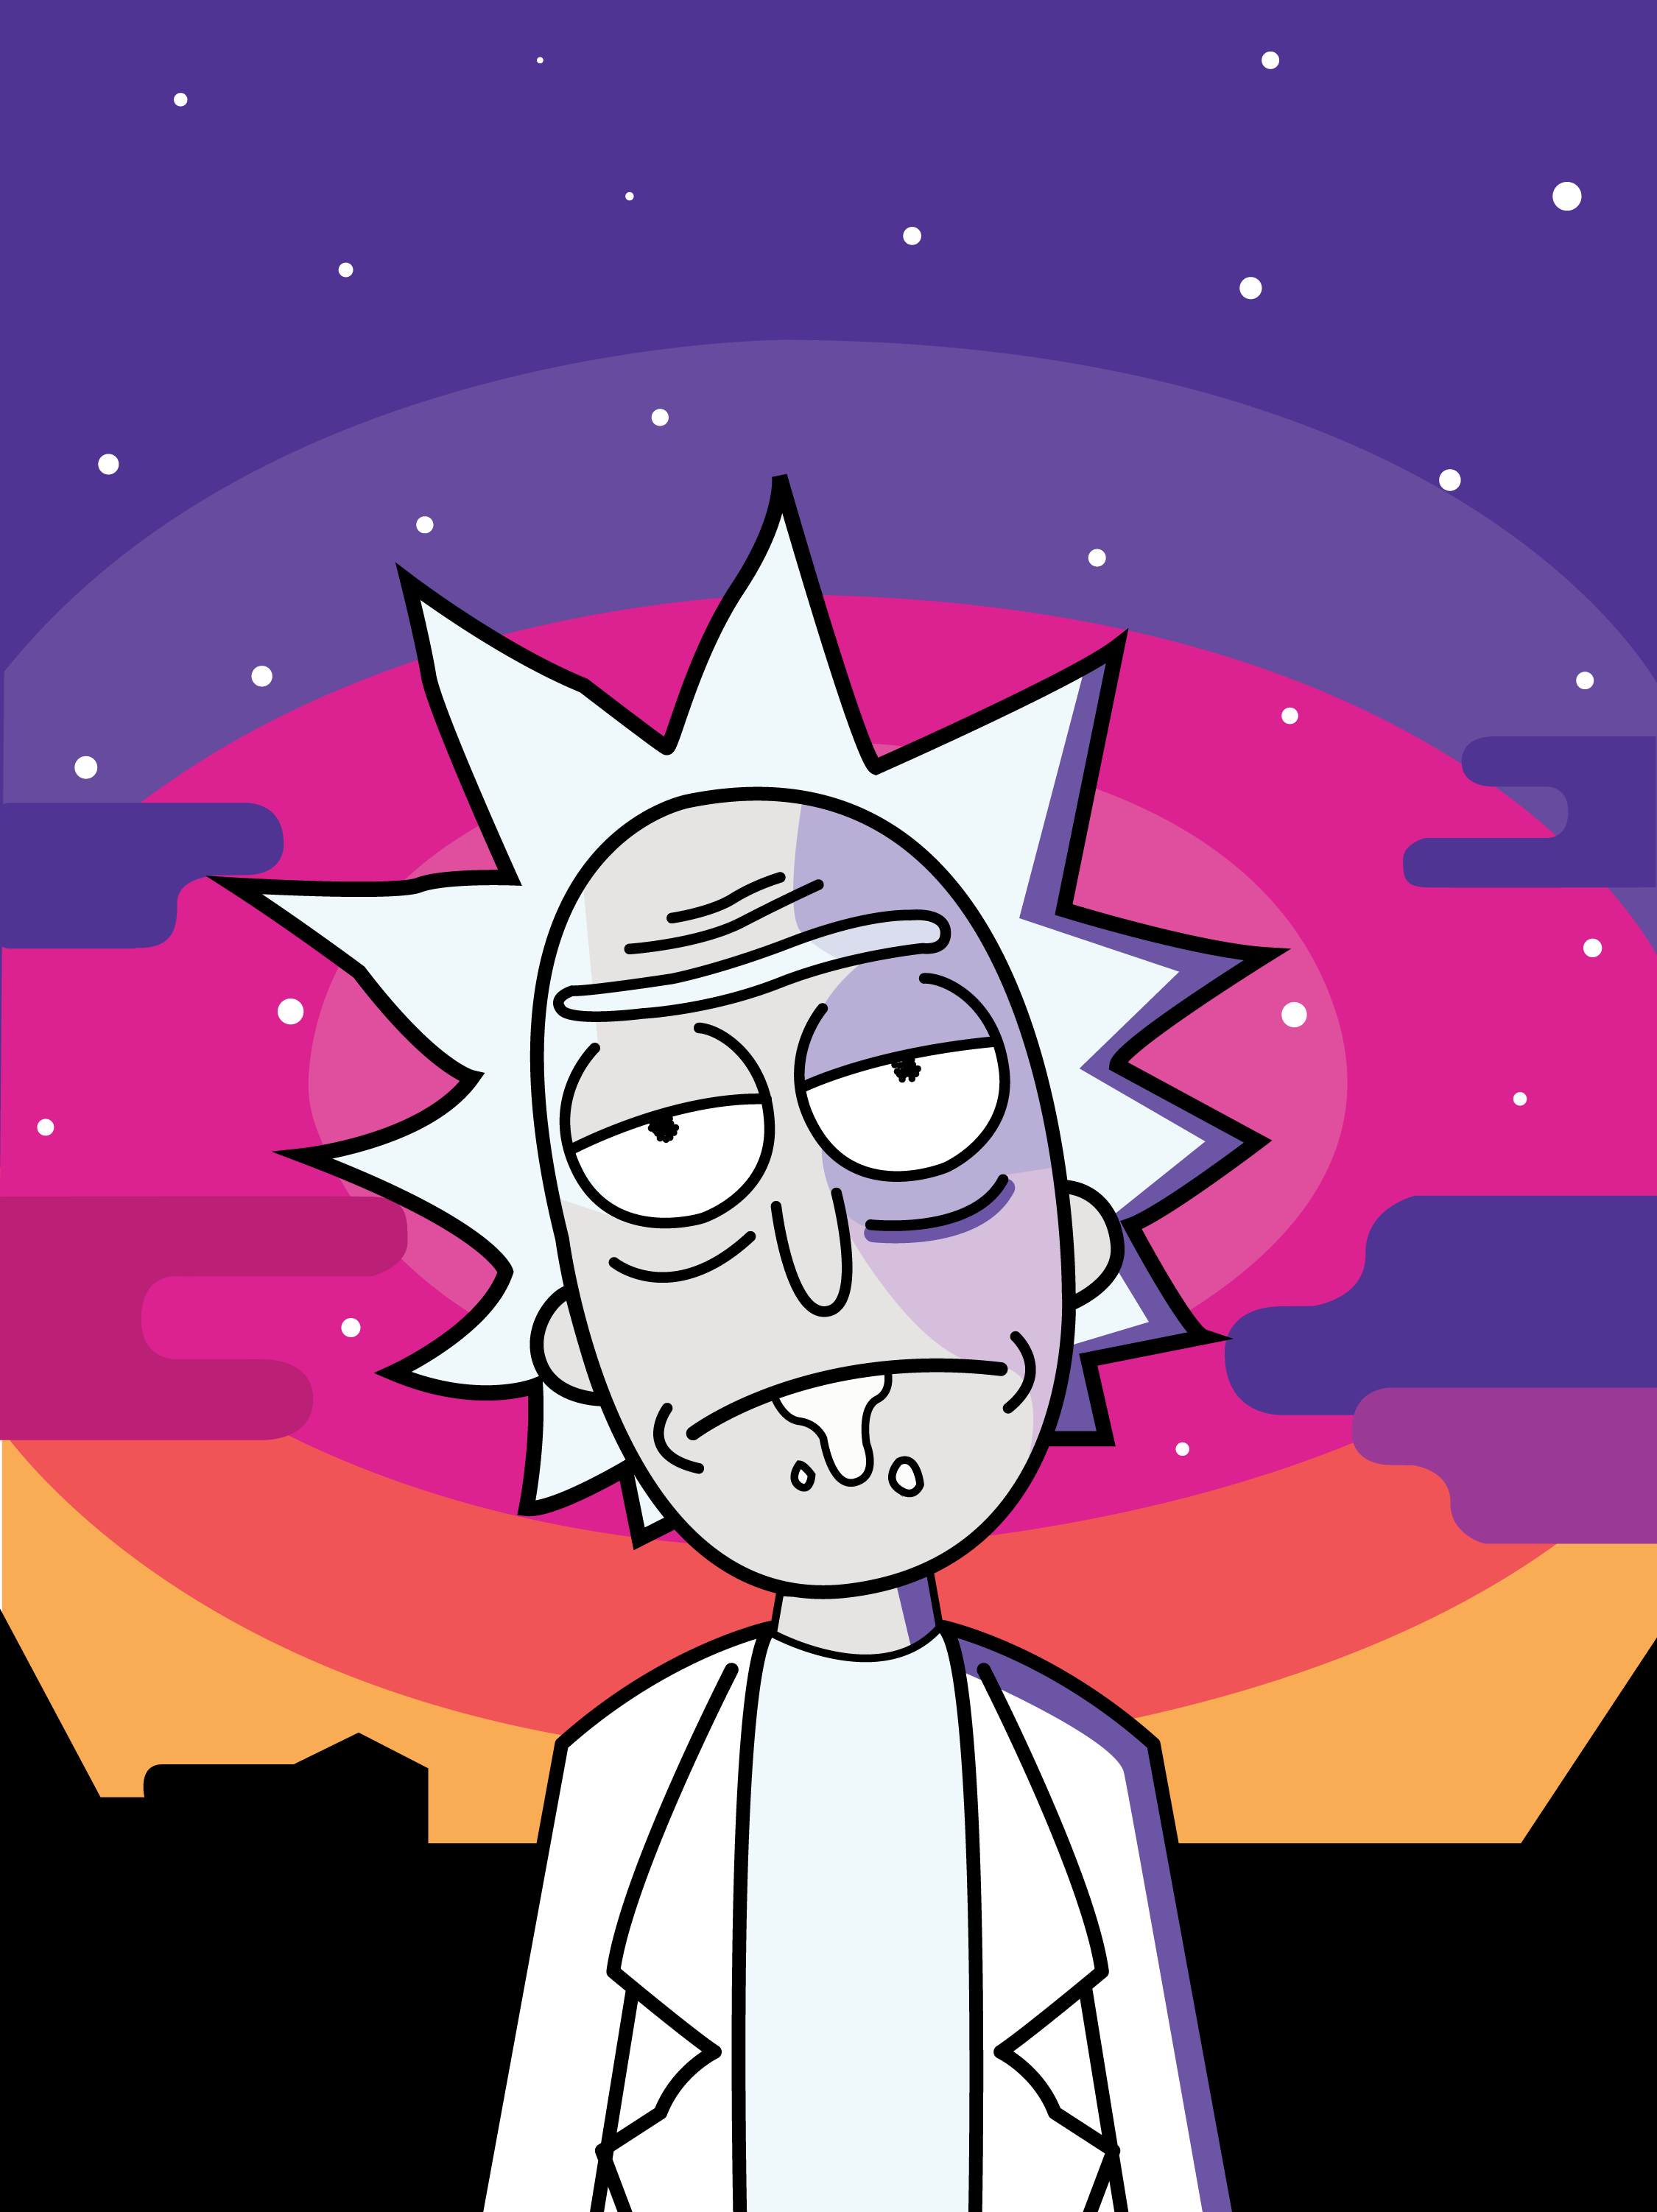 Rapper From Rick And Morty, Download Wallpaper on Jakpost